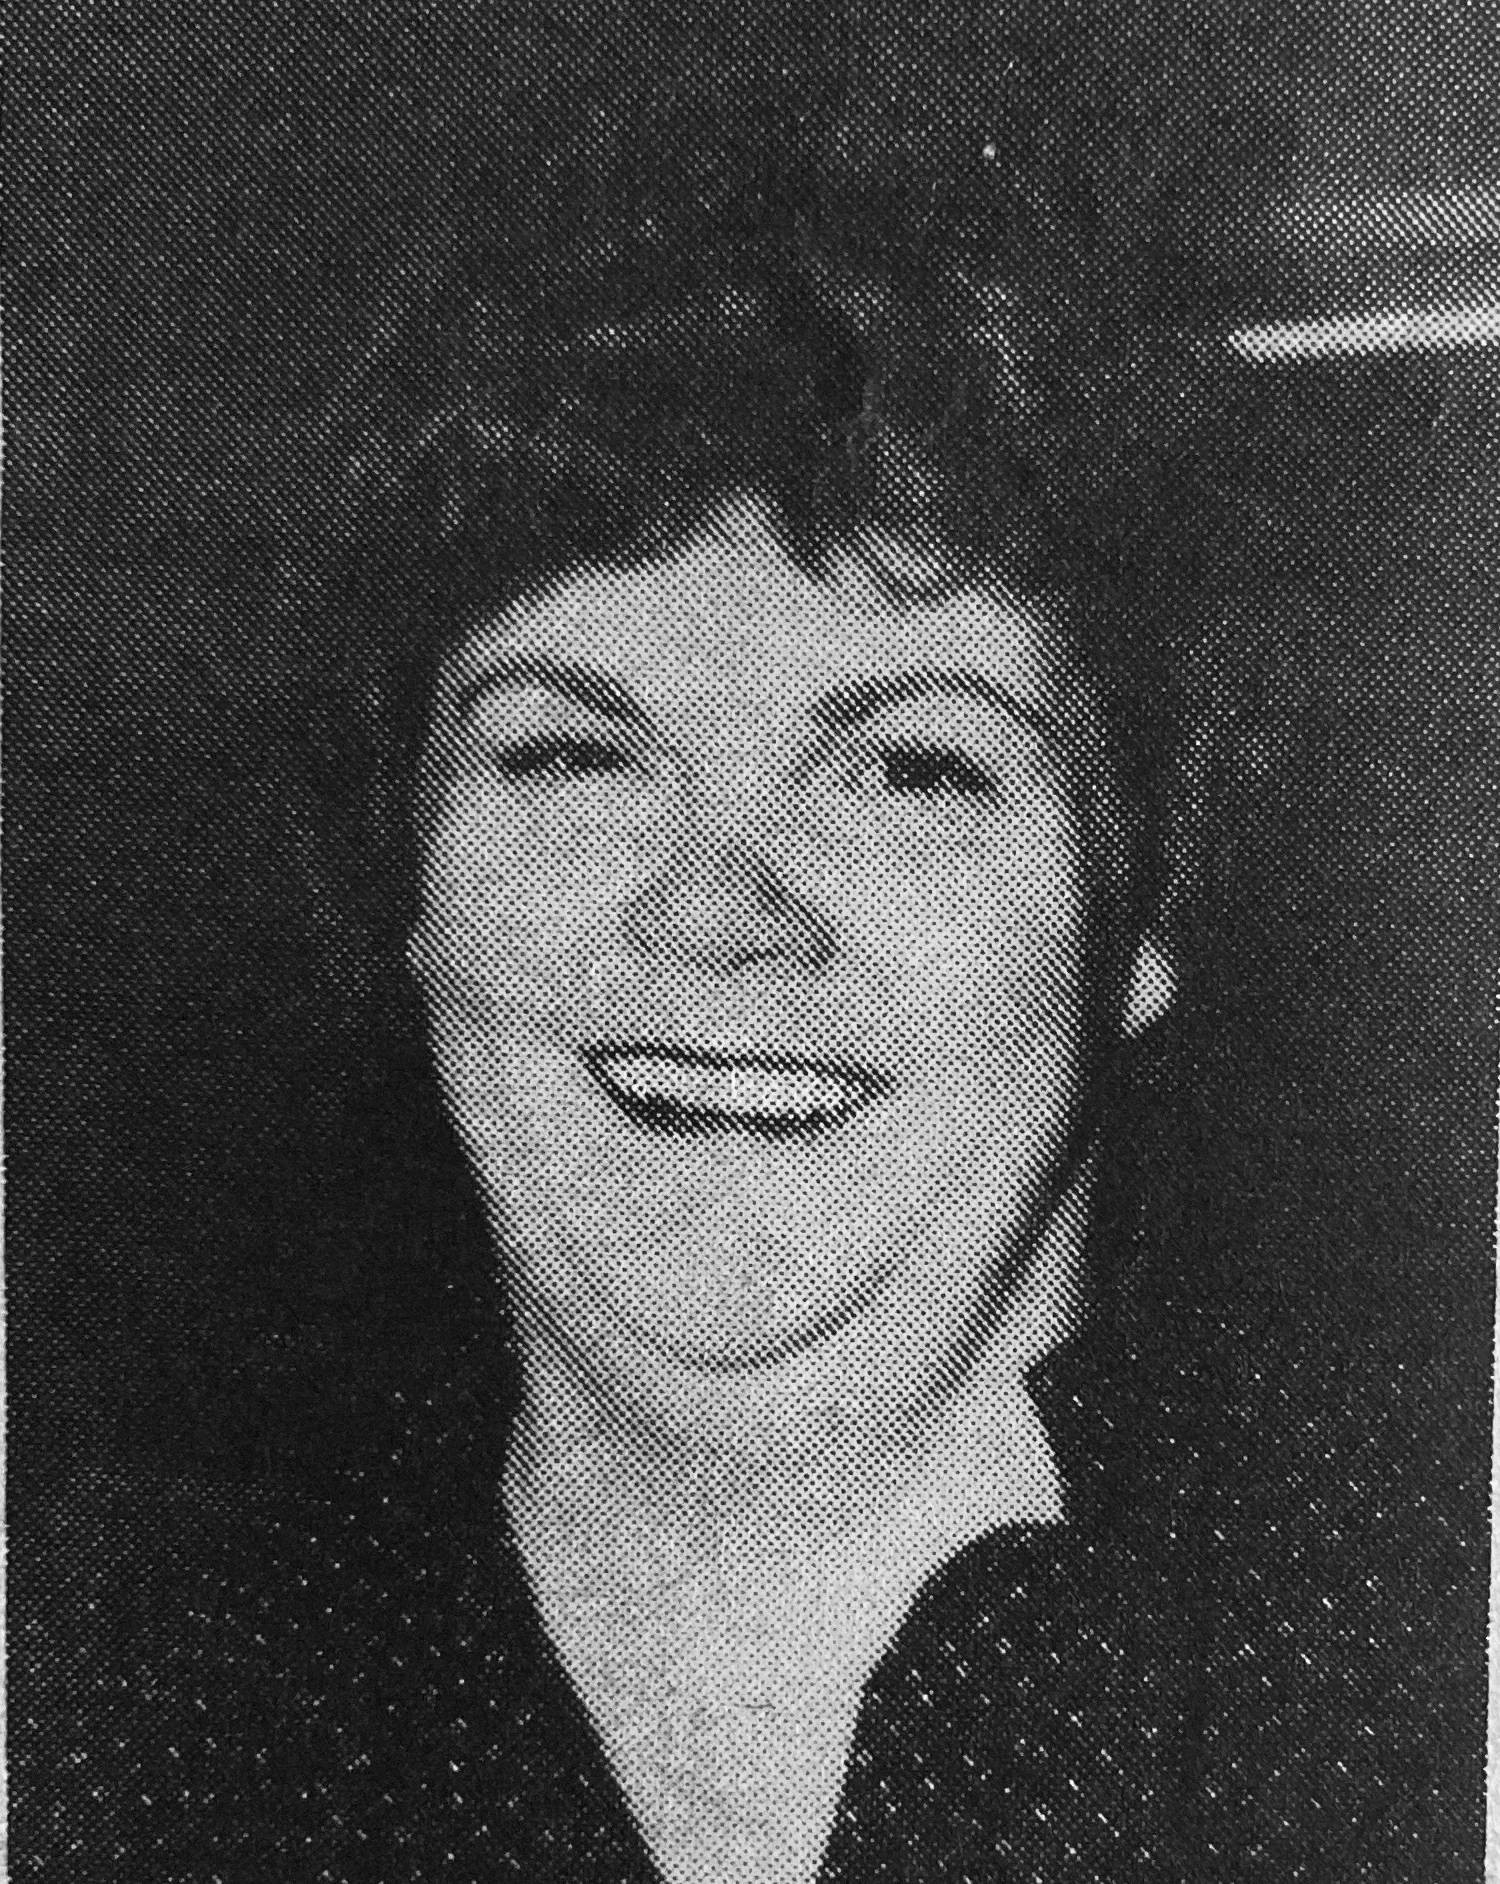 Gail Phillips in a campaign photo from her first election to public office in October 1981, when she was elected to the Homer City Council. In a three-way race for two seats, Phillips was the top vote getter by one vote. (Homer News file photo)